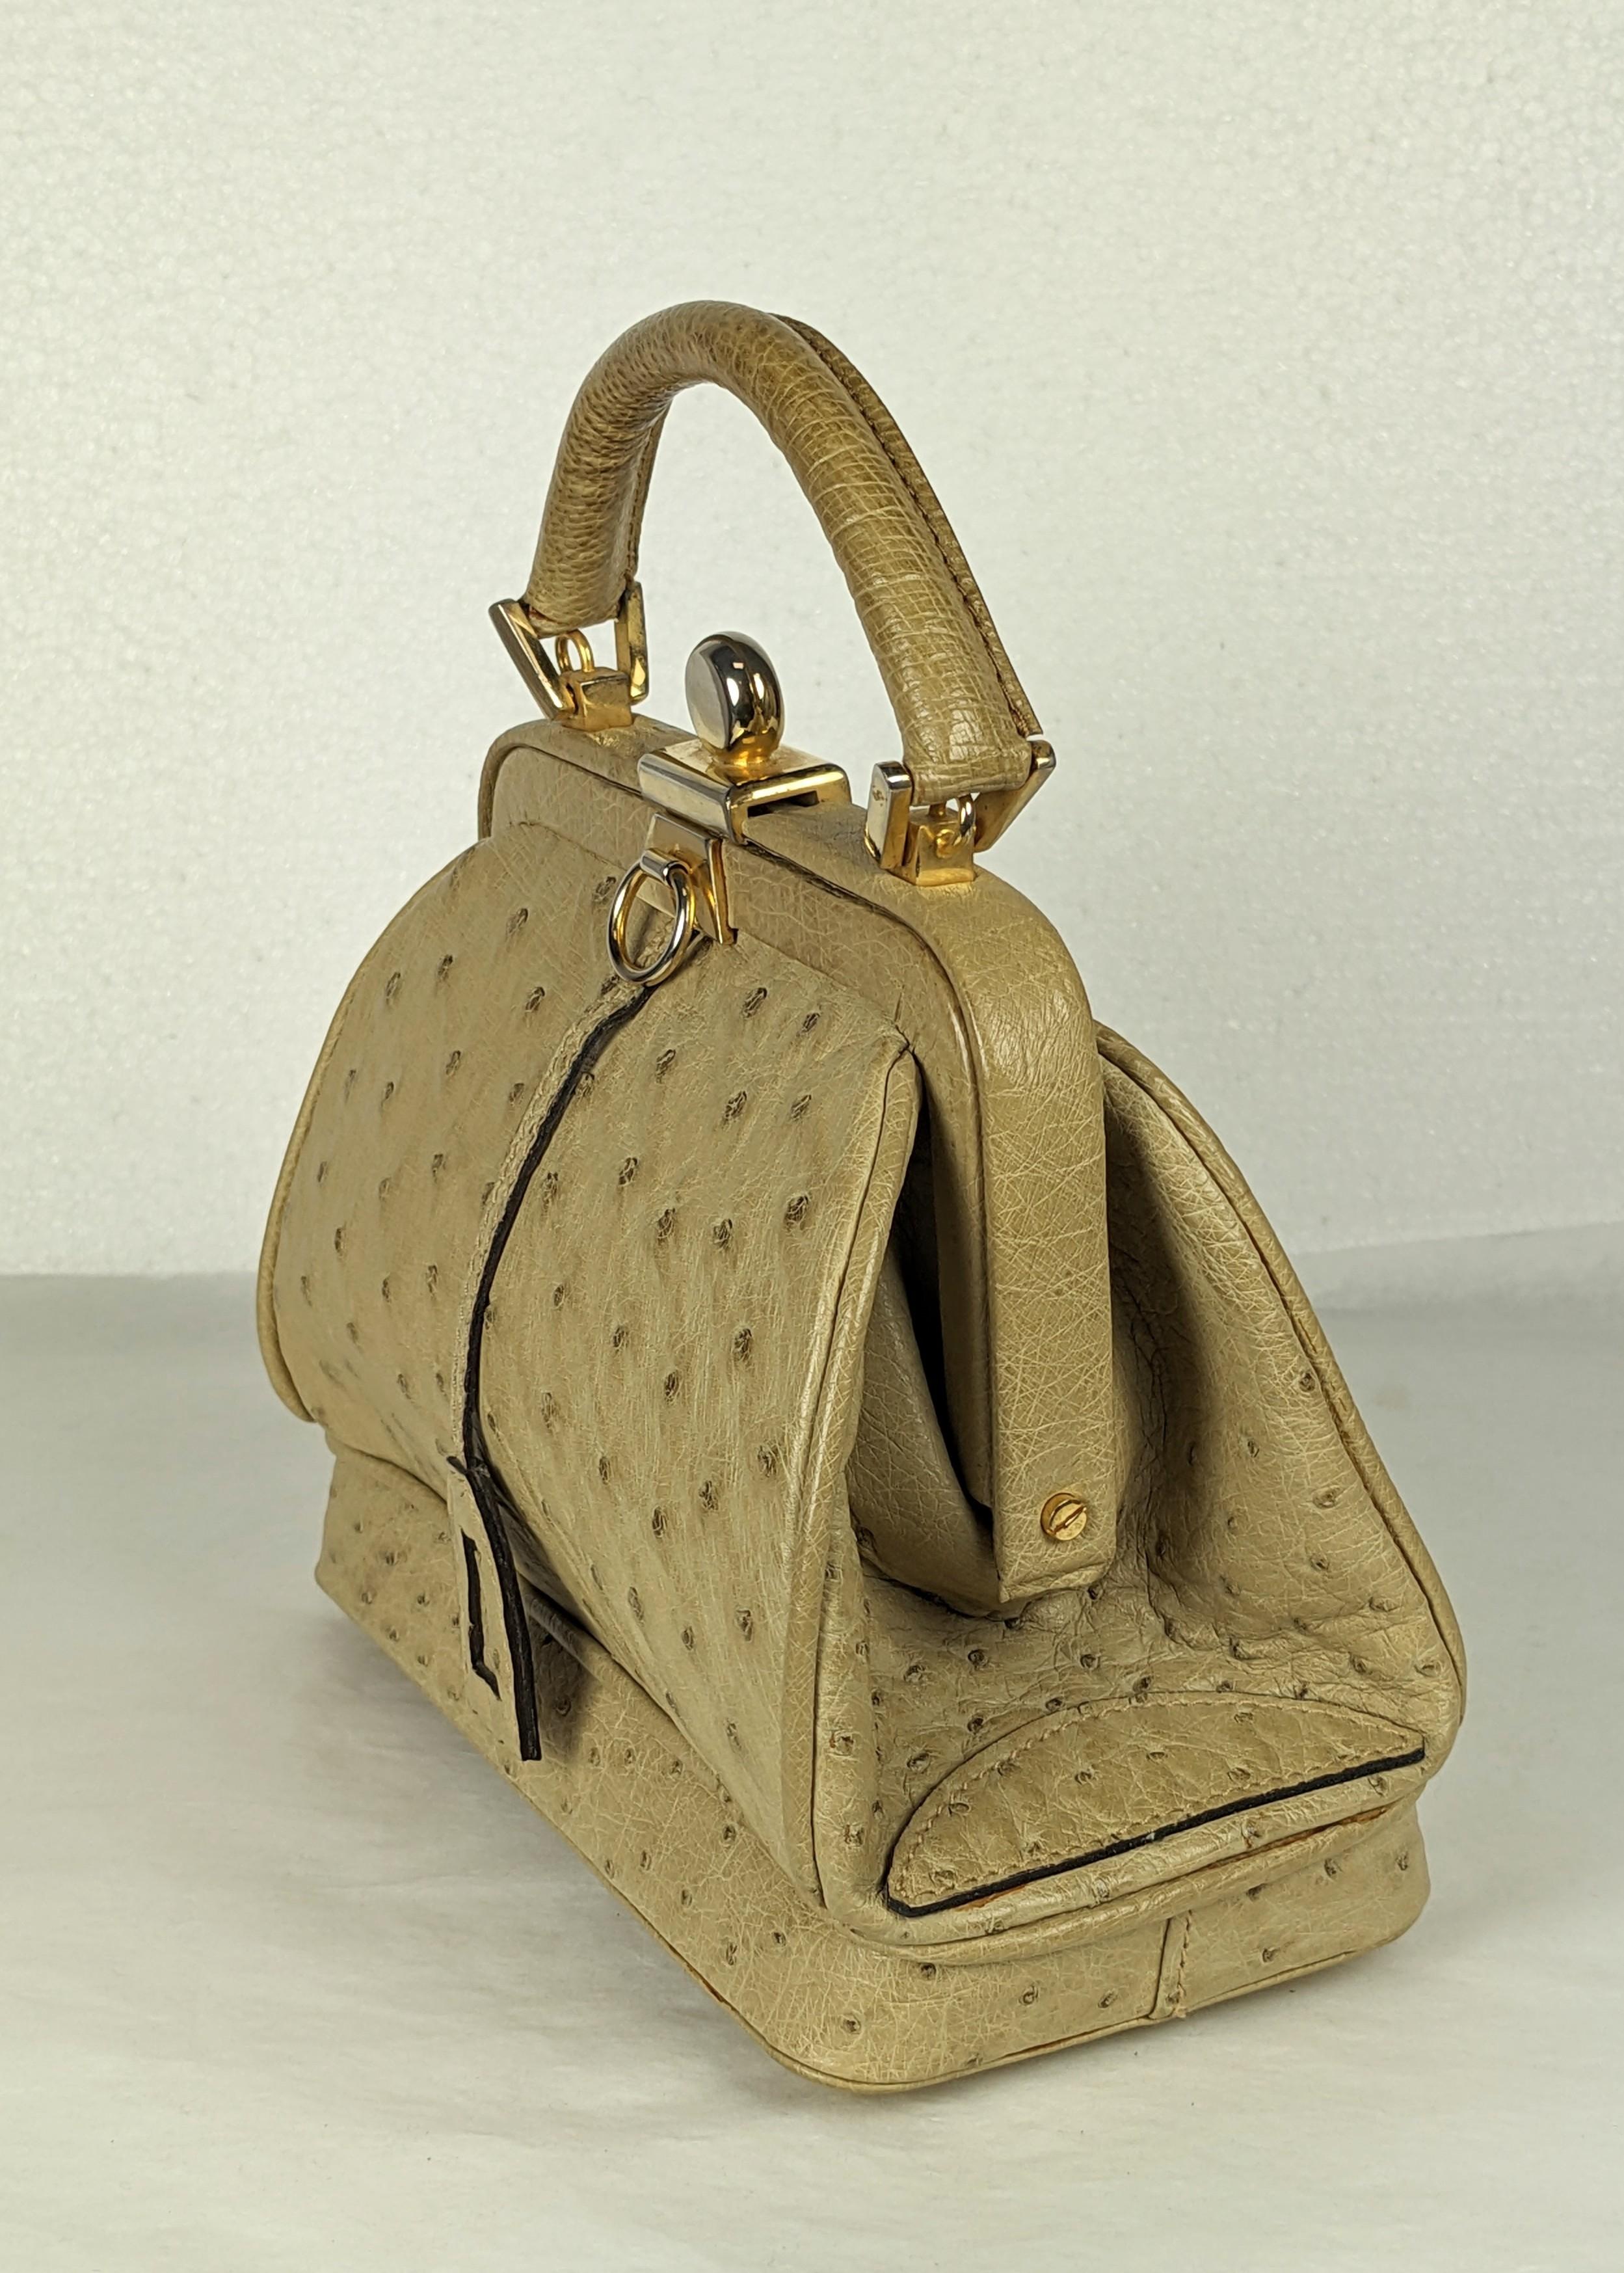 Lana Marks Ostrich Mini Satchel In Good Condition For Sale In New York, NY